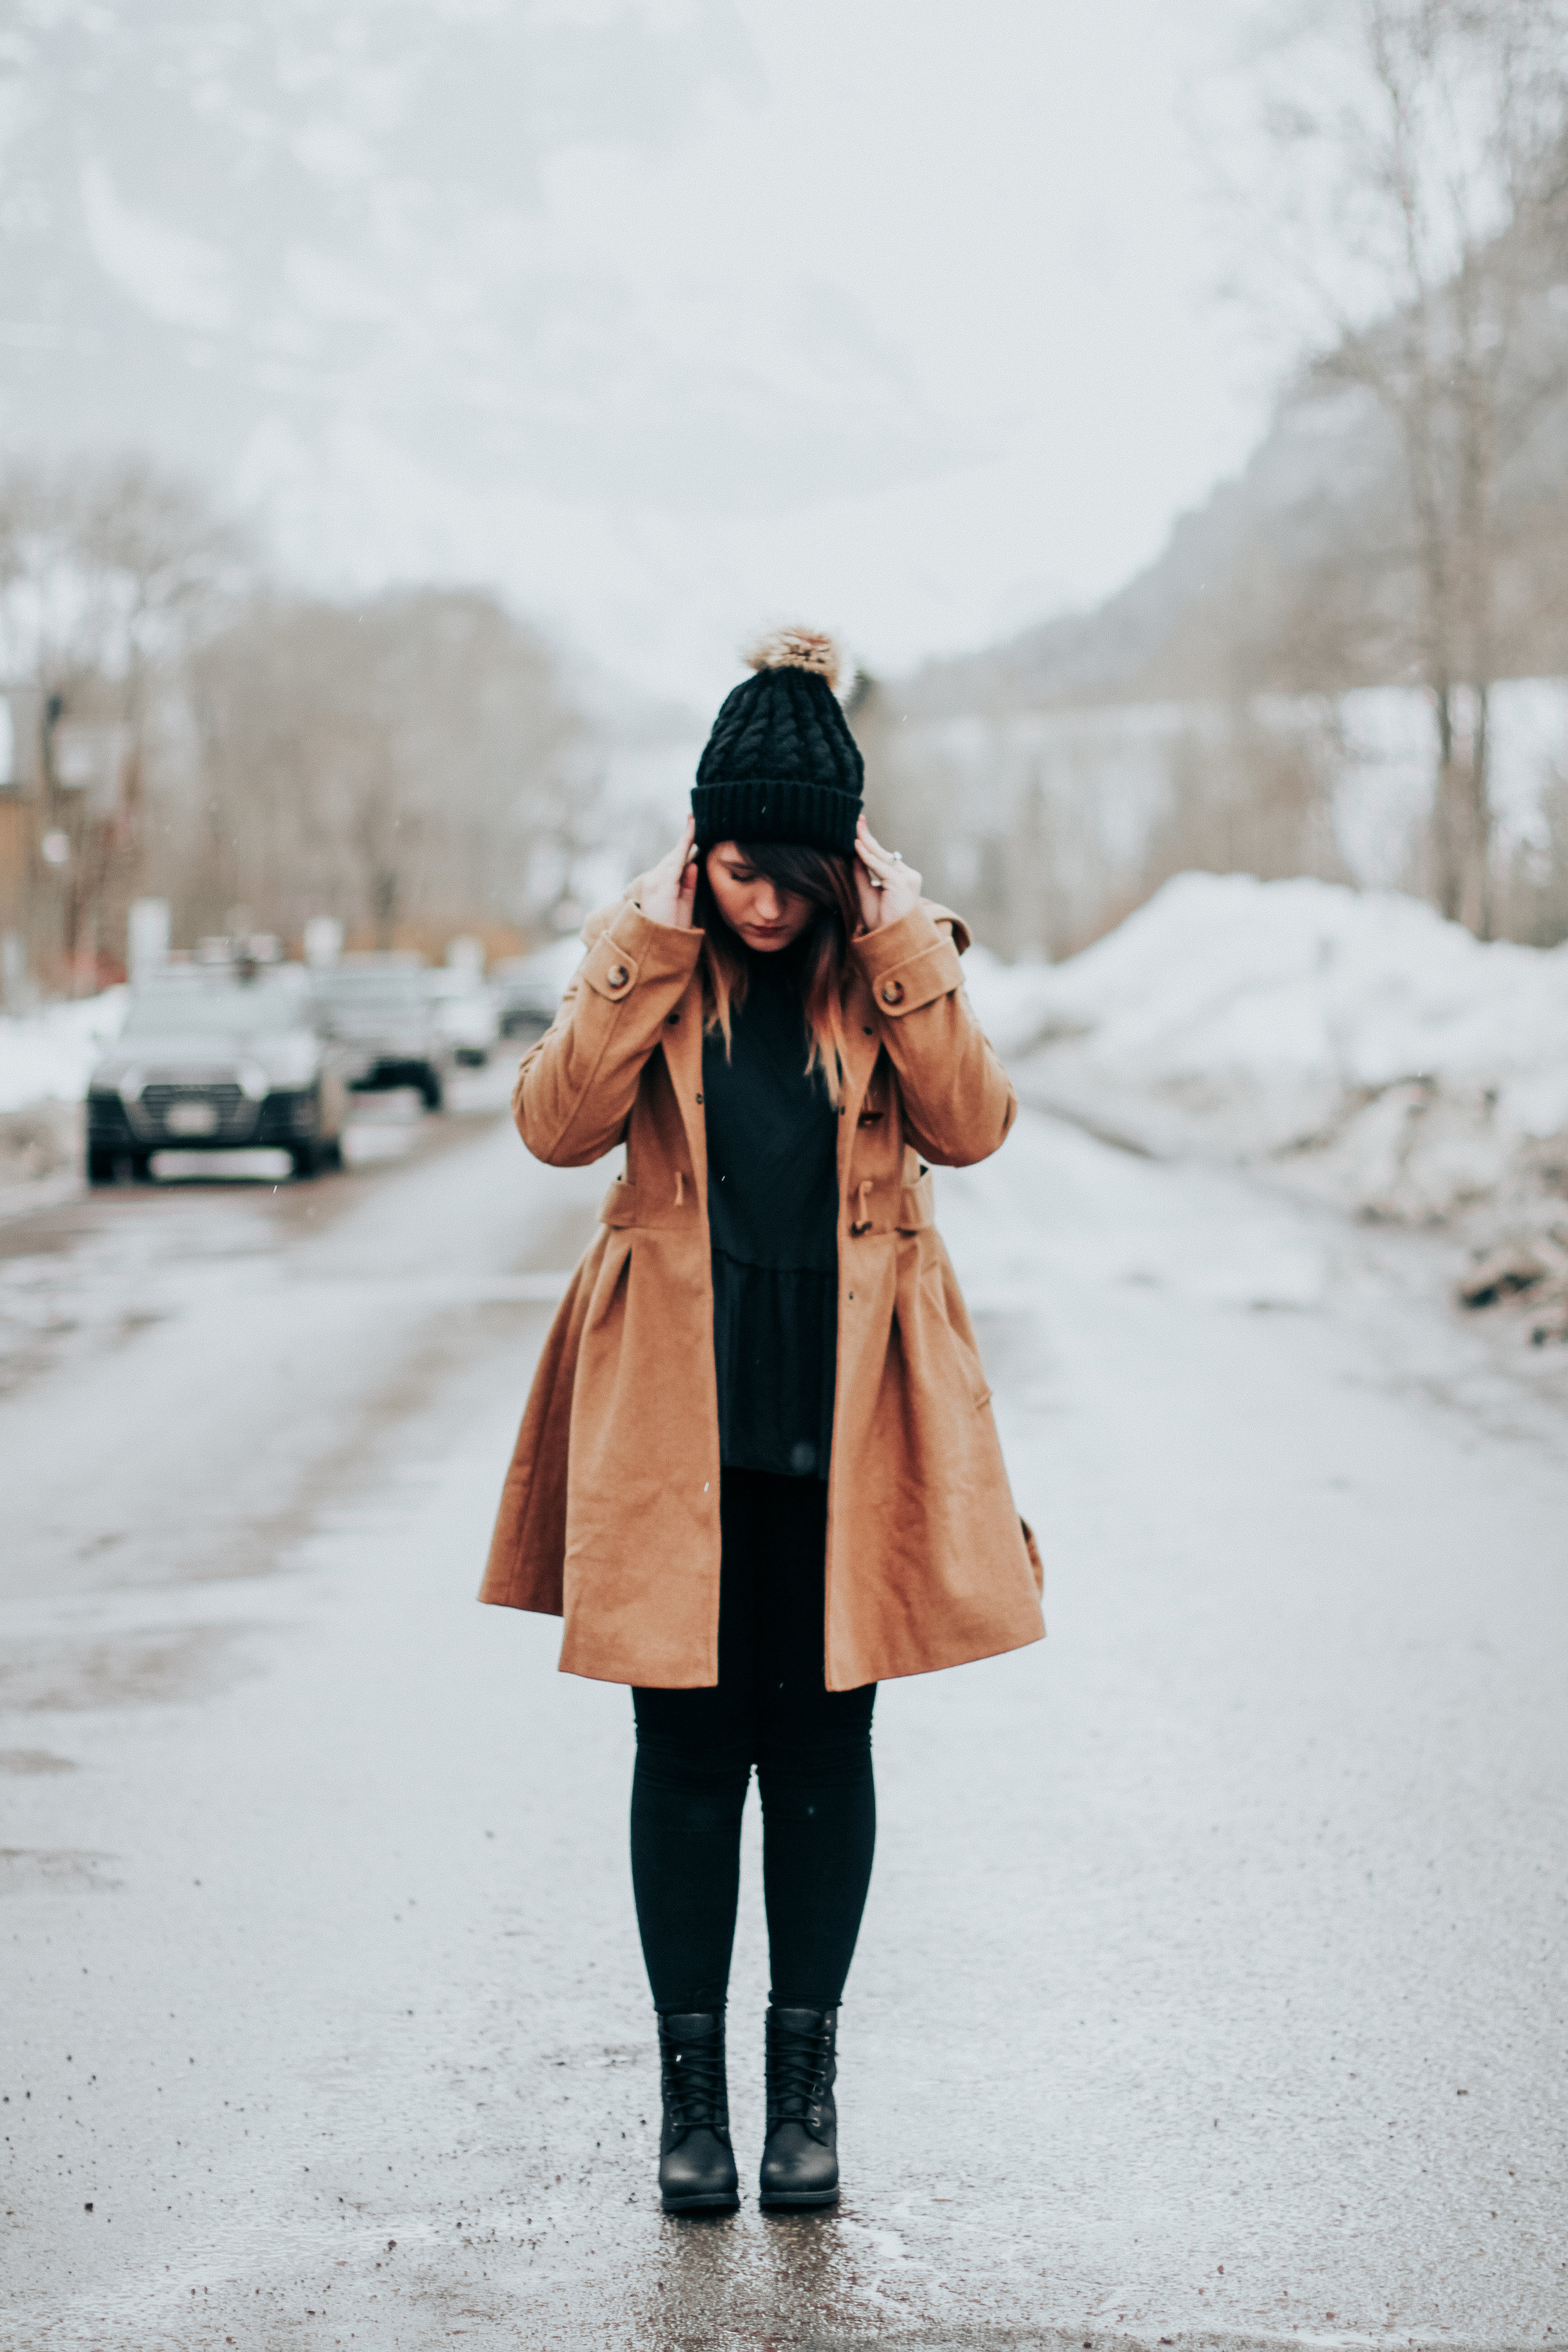 Reflecting on 2017 Telluride CO Winter Outfit of the Day via Chelcey Tate www.chelceytate.com